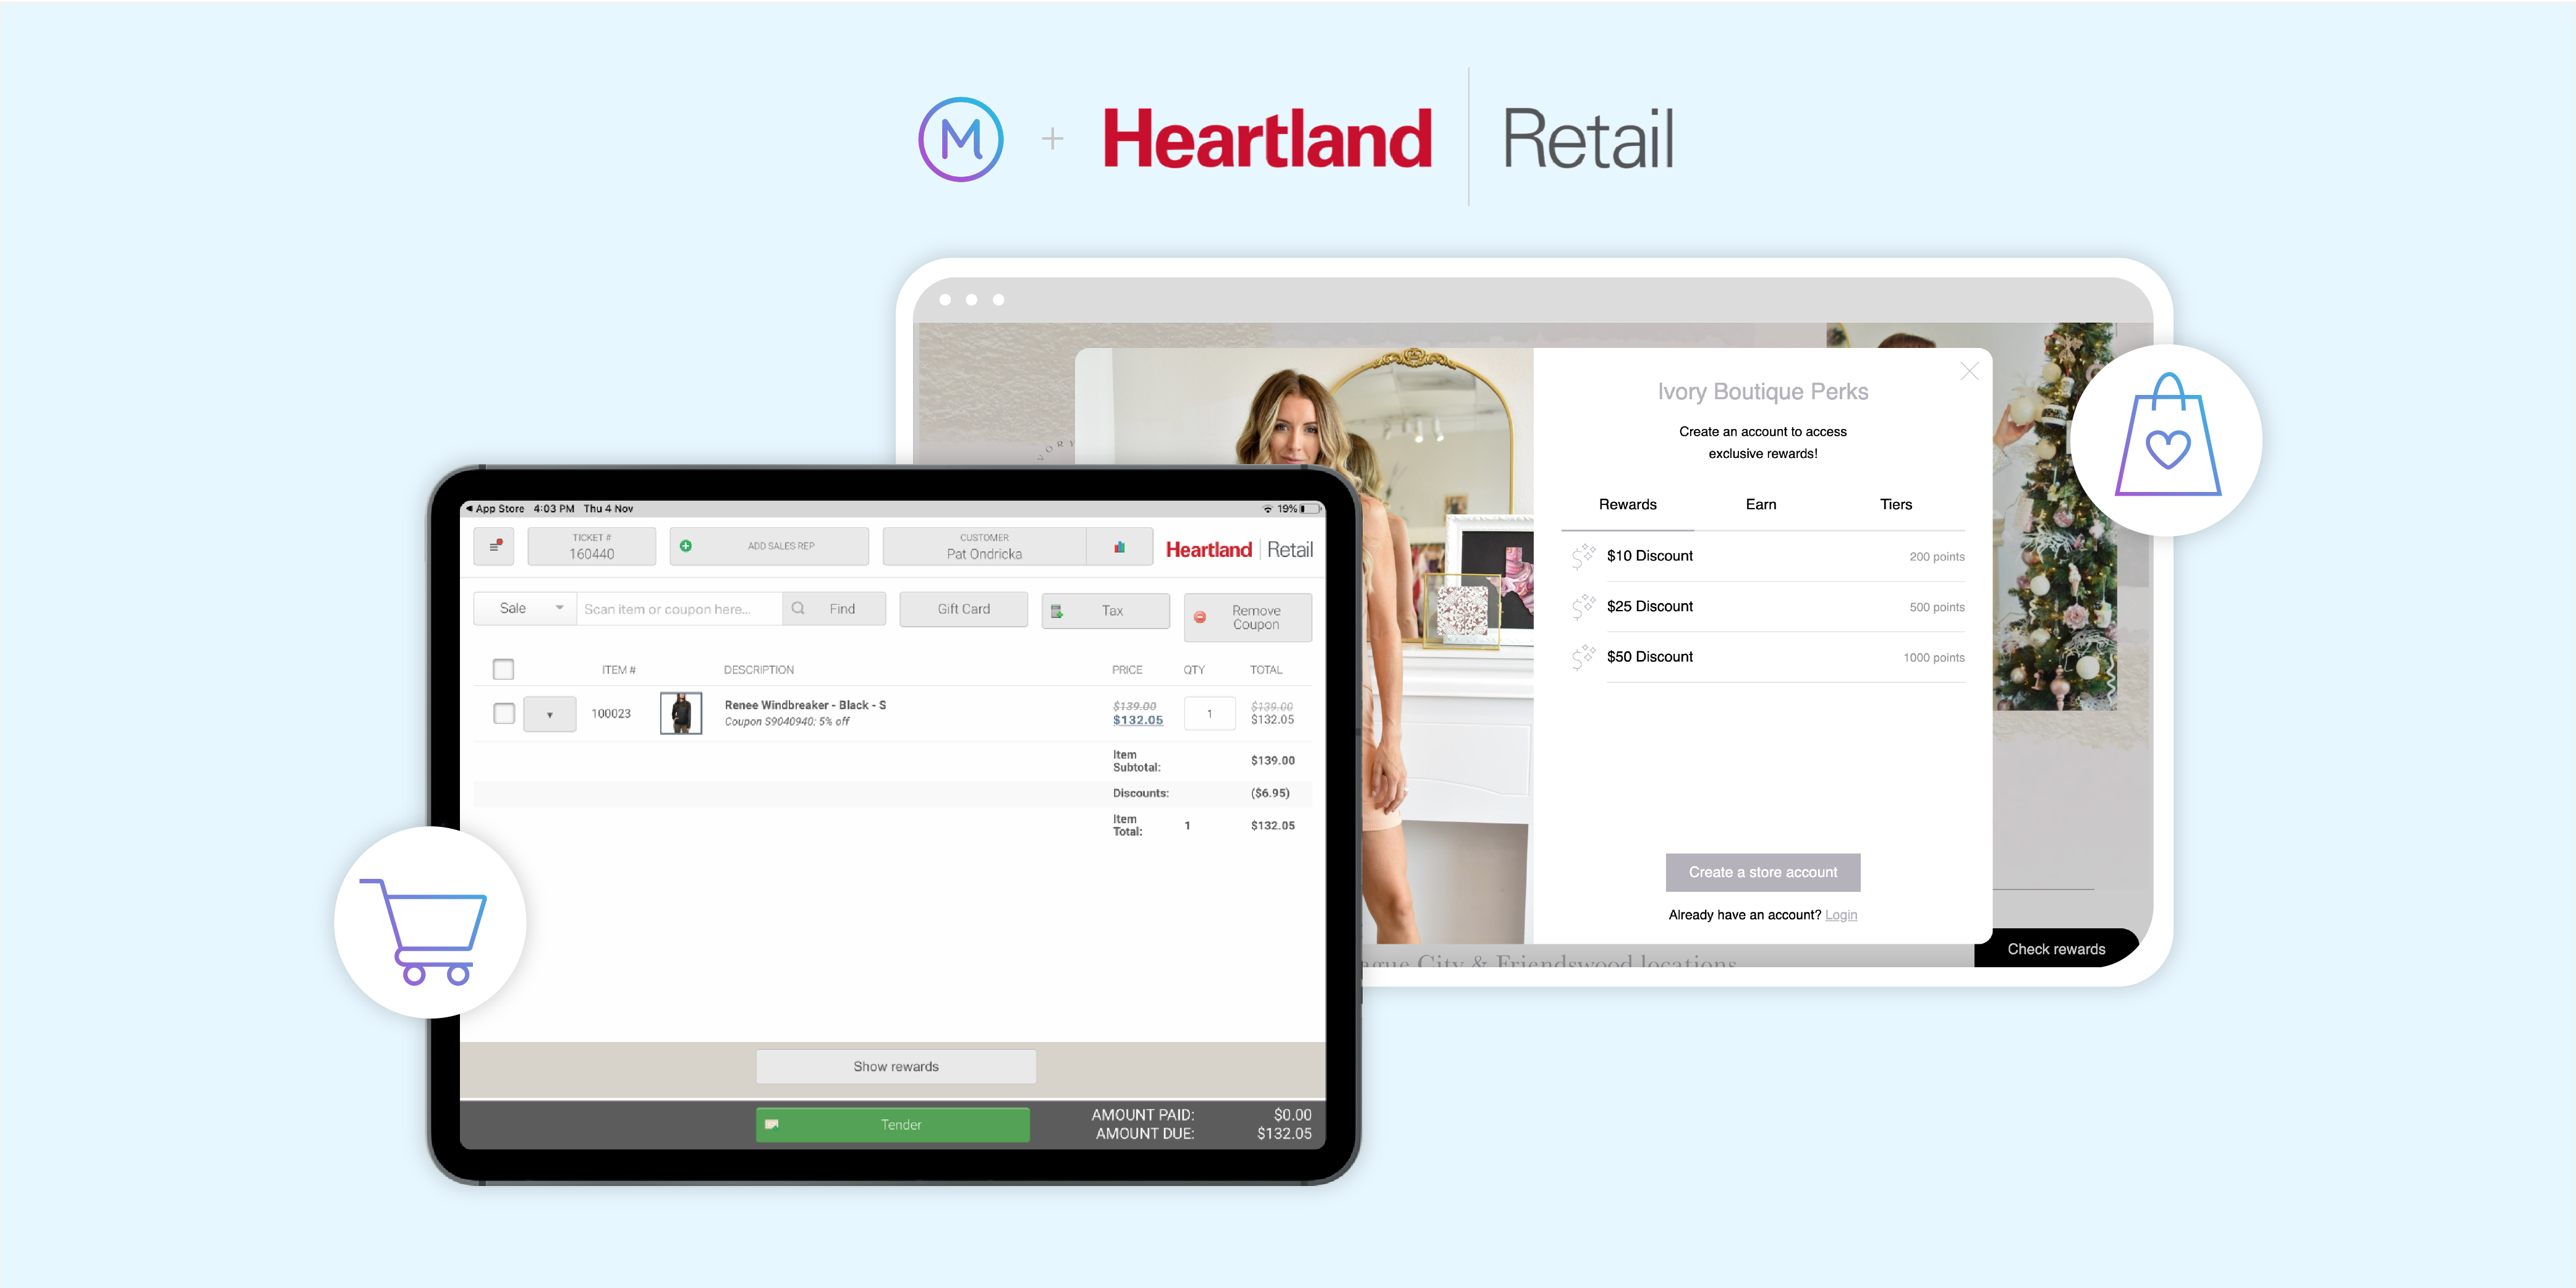 Heartland Retail POS with a retailer loyalty program in the background.